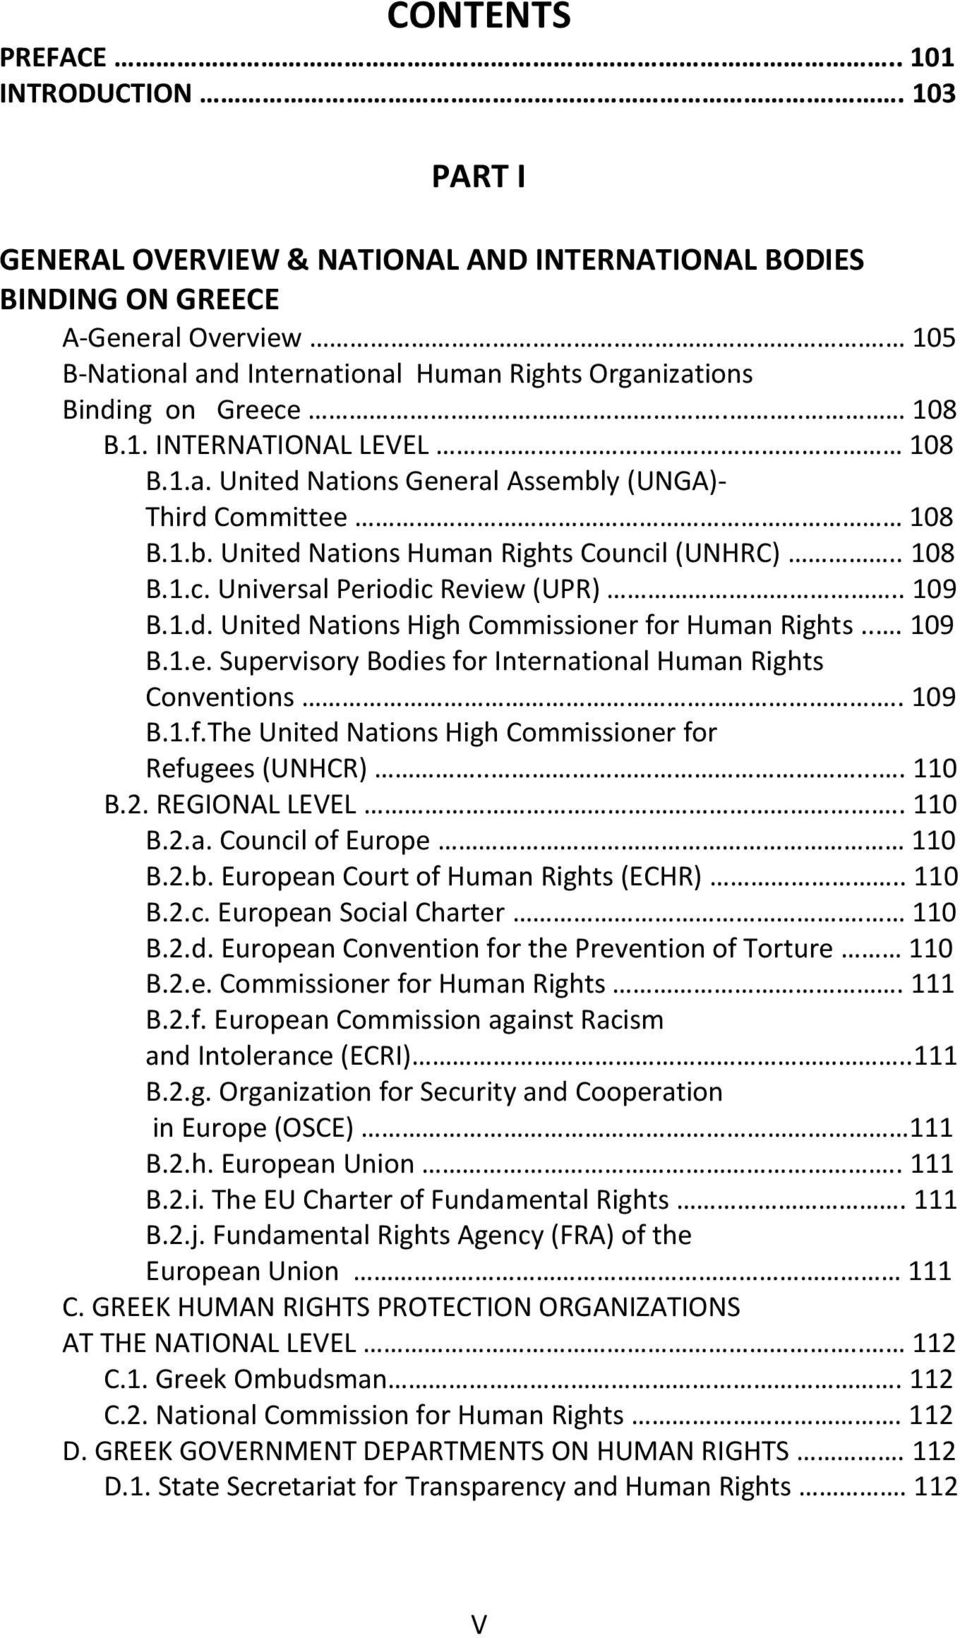 . 108 B.1.c. Universal Periodic Review (UPR).. 109 B.1.d. United Nations High Commissioner for Human Rights... 109 B.1.e. Supervisory Bodies for International Human Rights Conventions.. 109 B.1.f.The United Nations High Commissioner for Refugees (UNHCR).